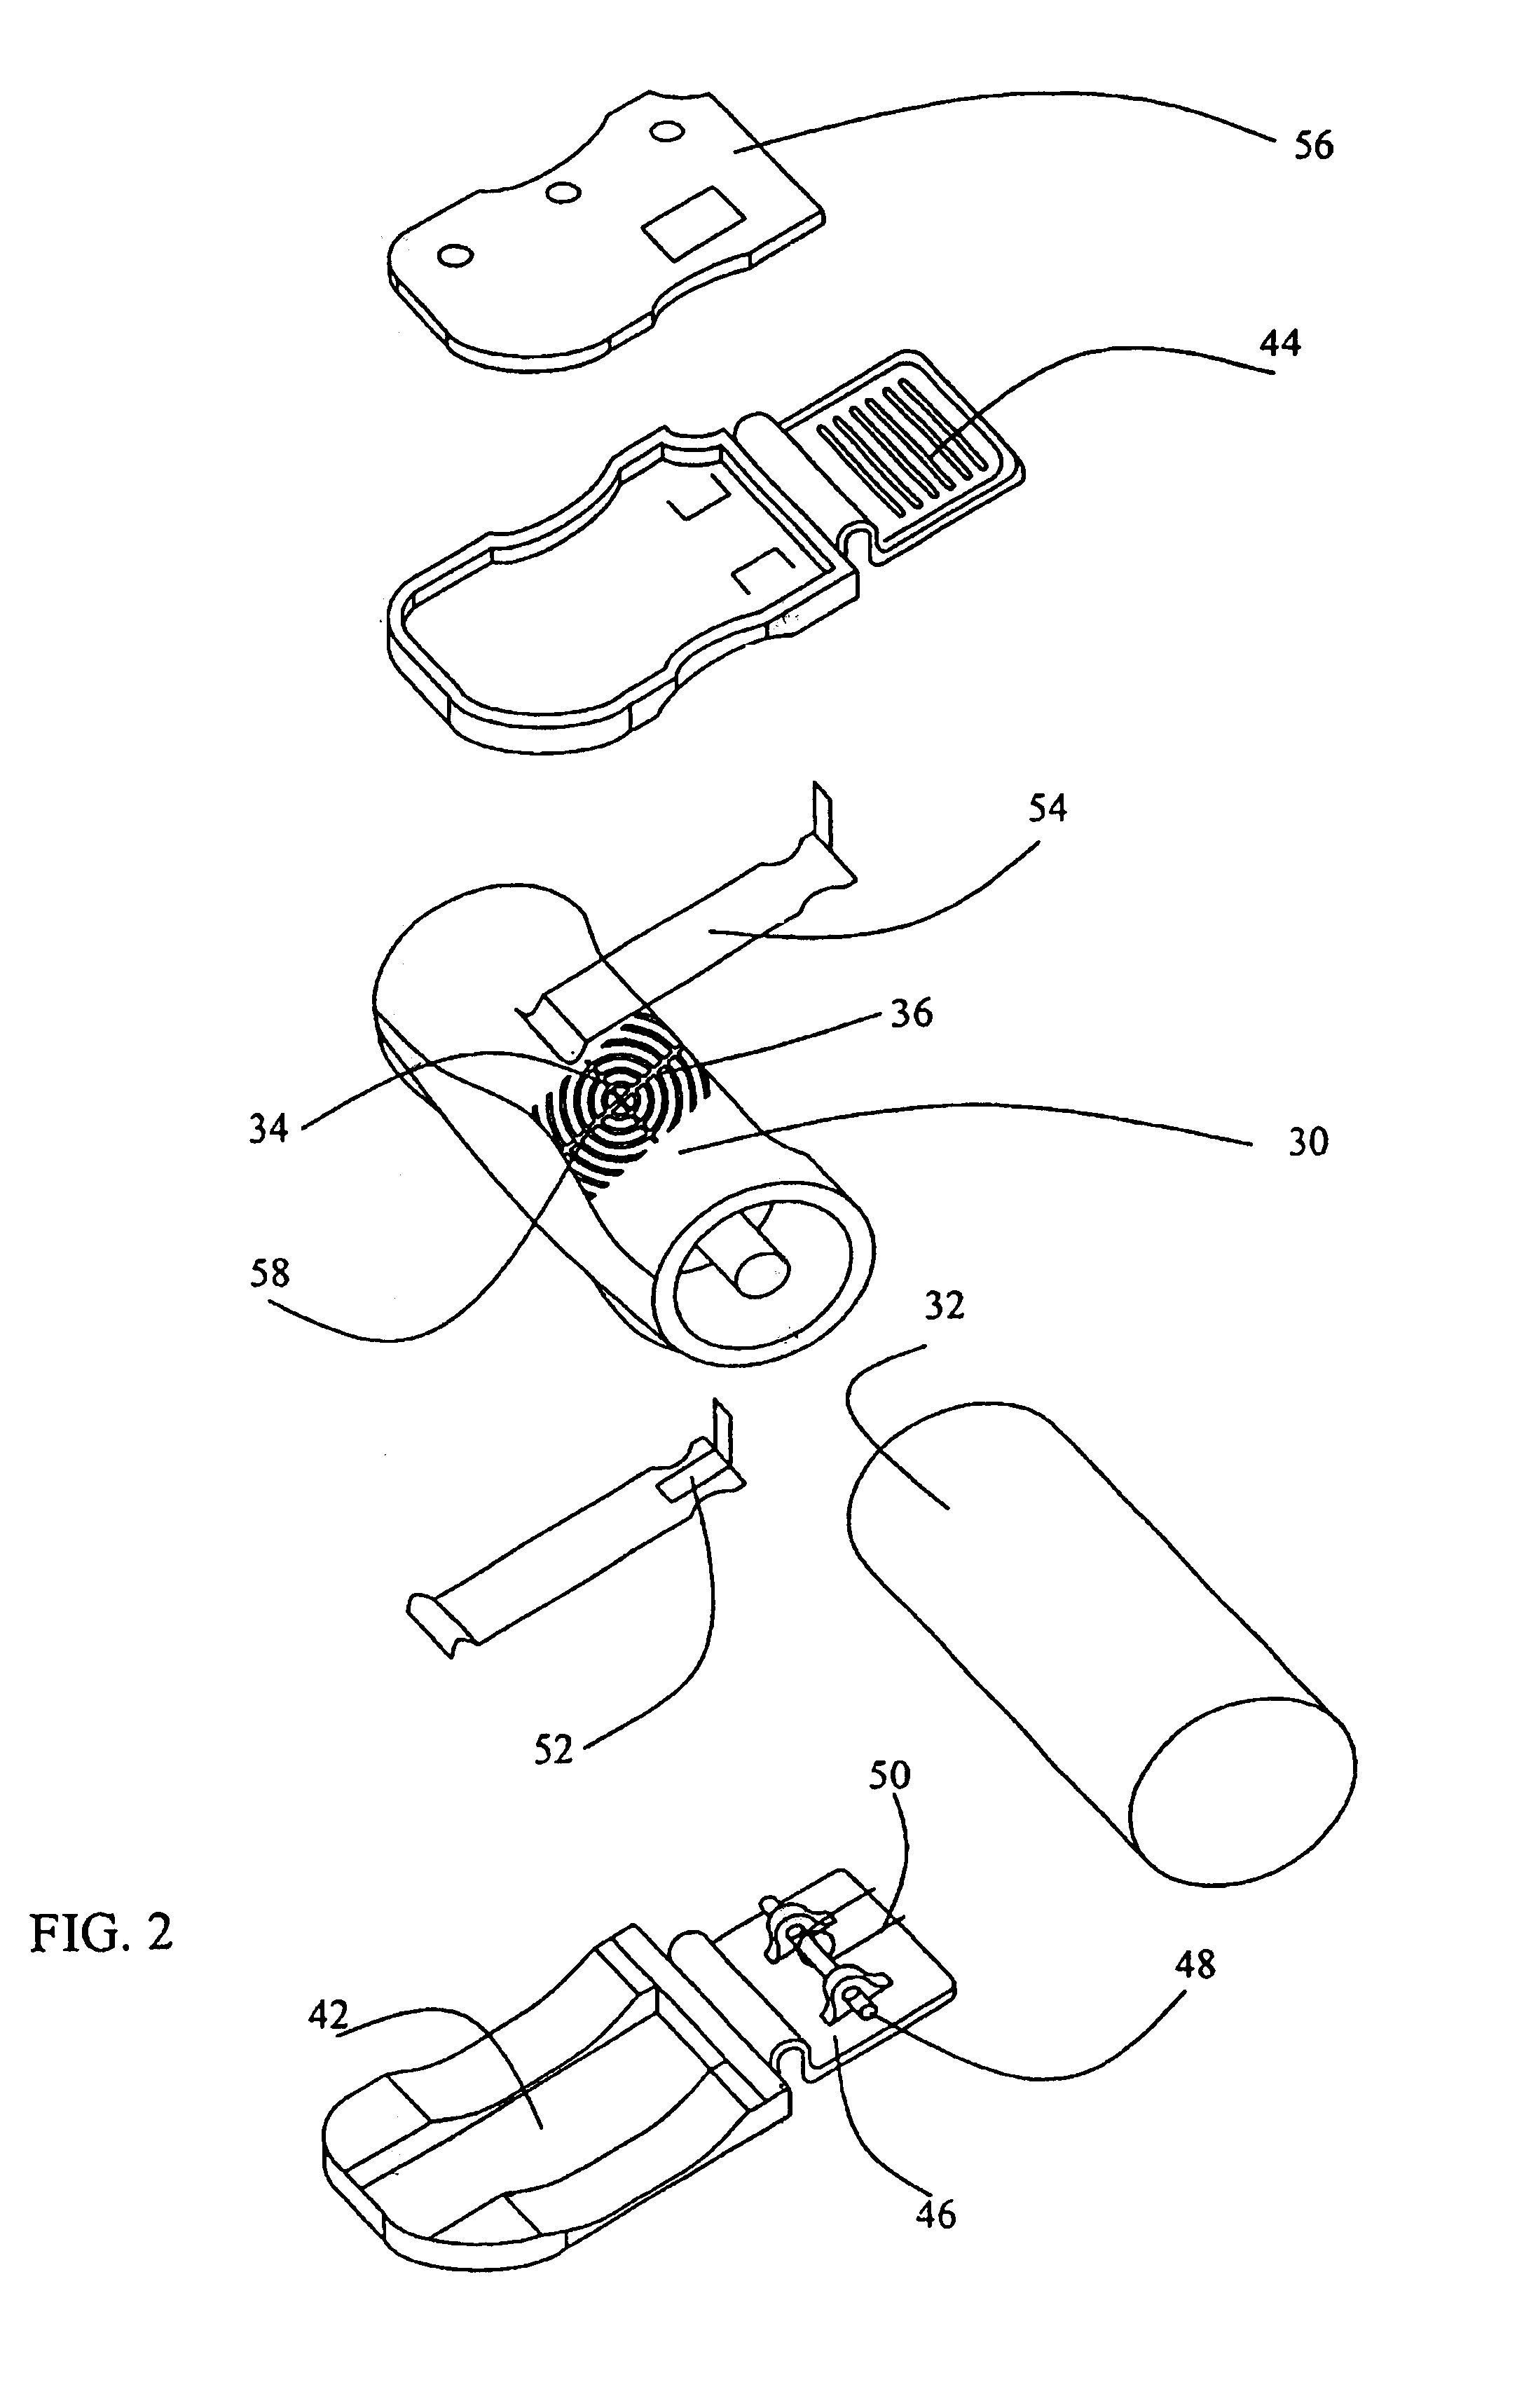 Method and device for detecting malfunction in a gravity fed intravenous delivery system